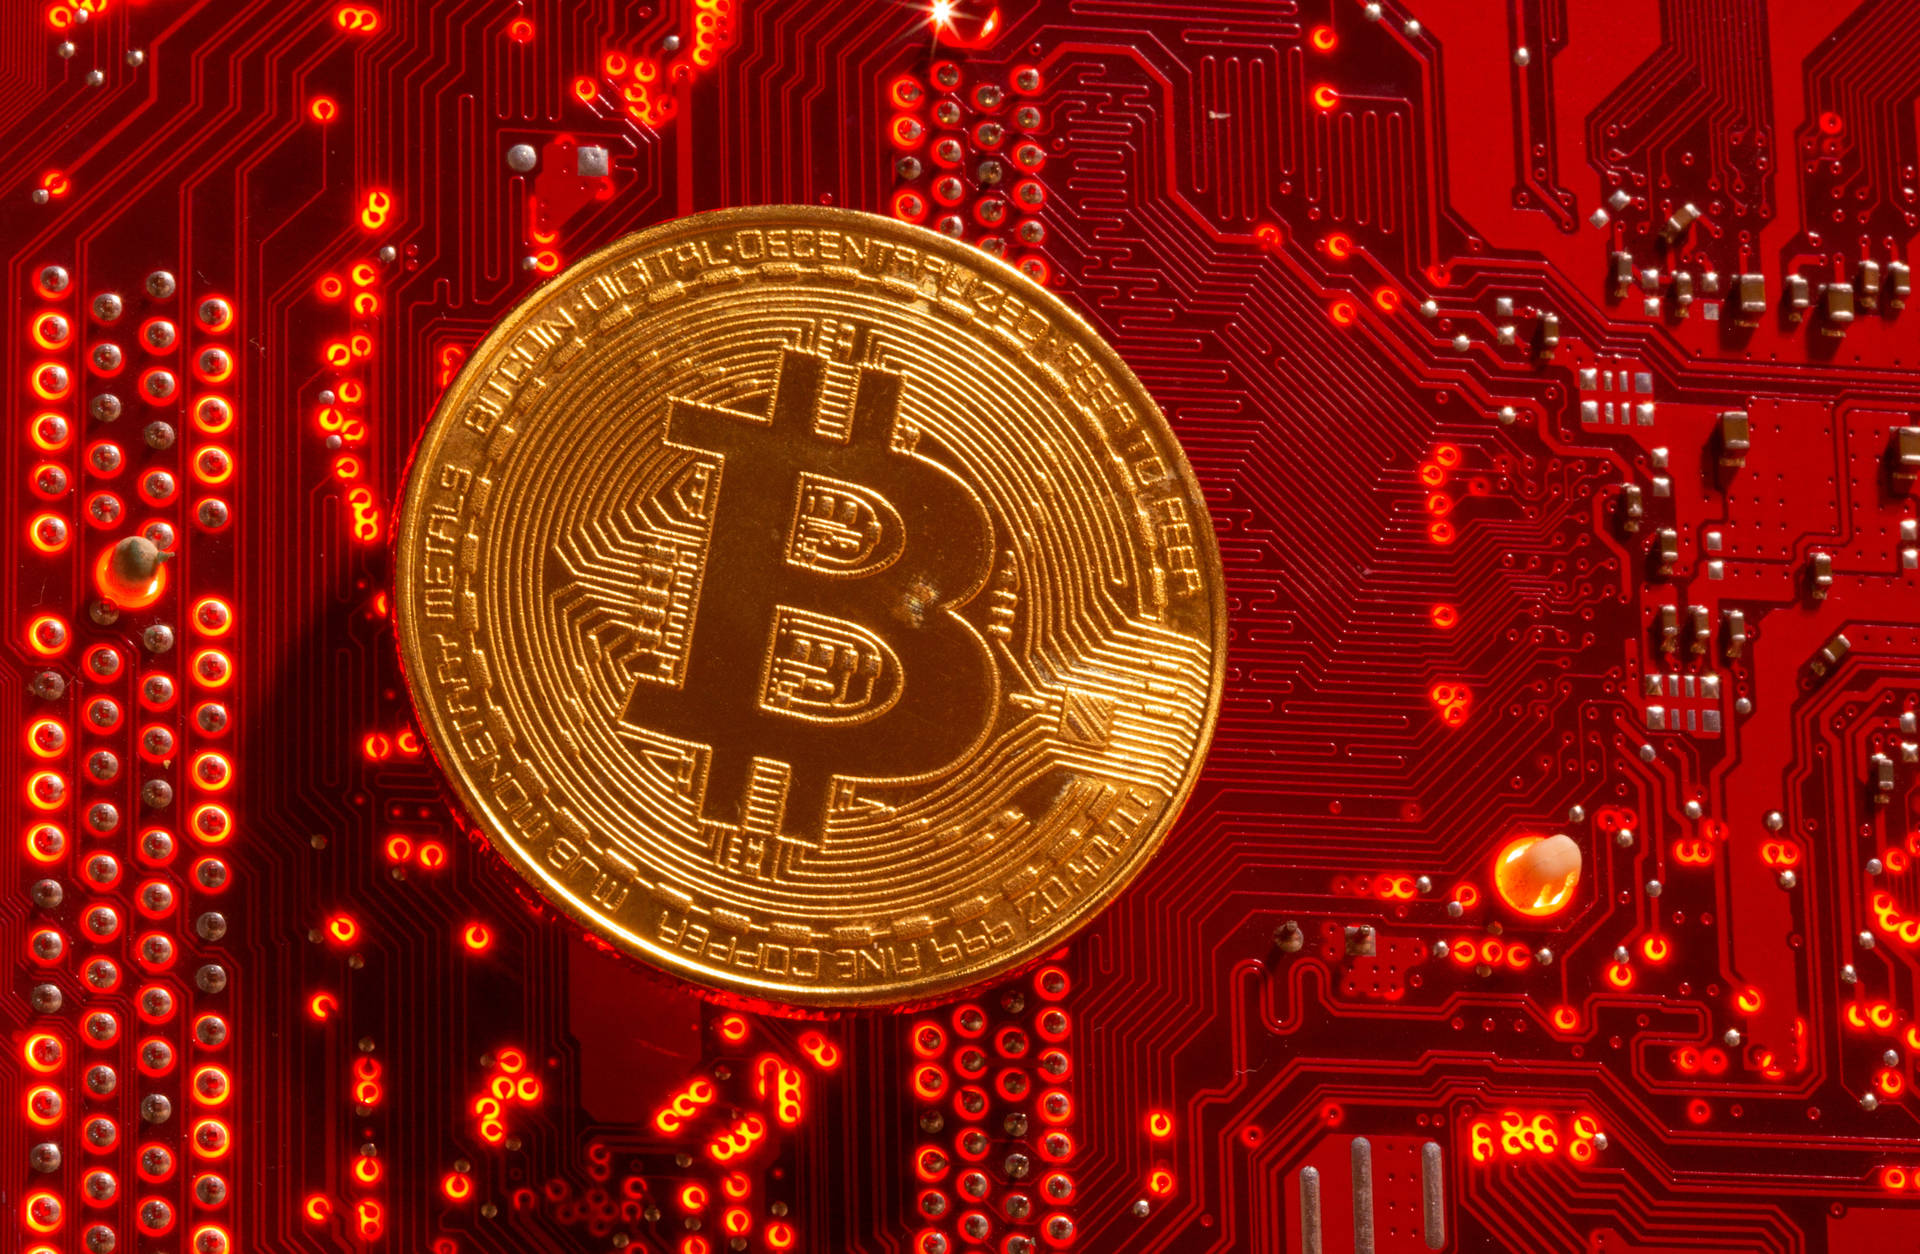 Gold Cryptocurrency Coin On Red